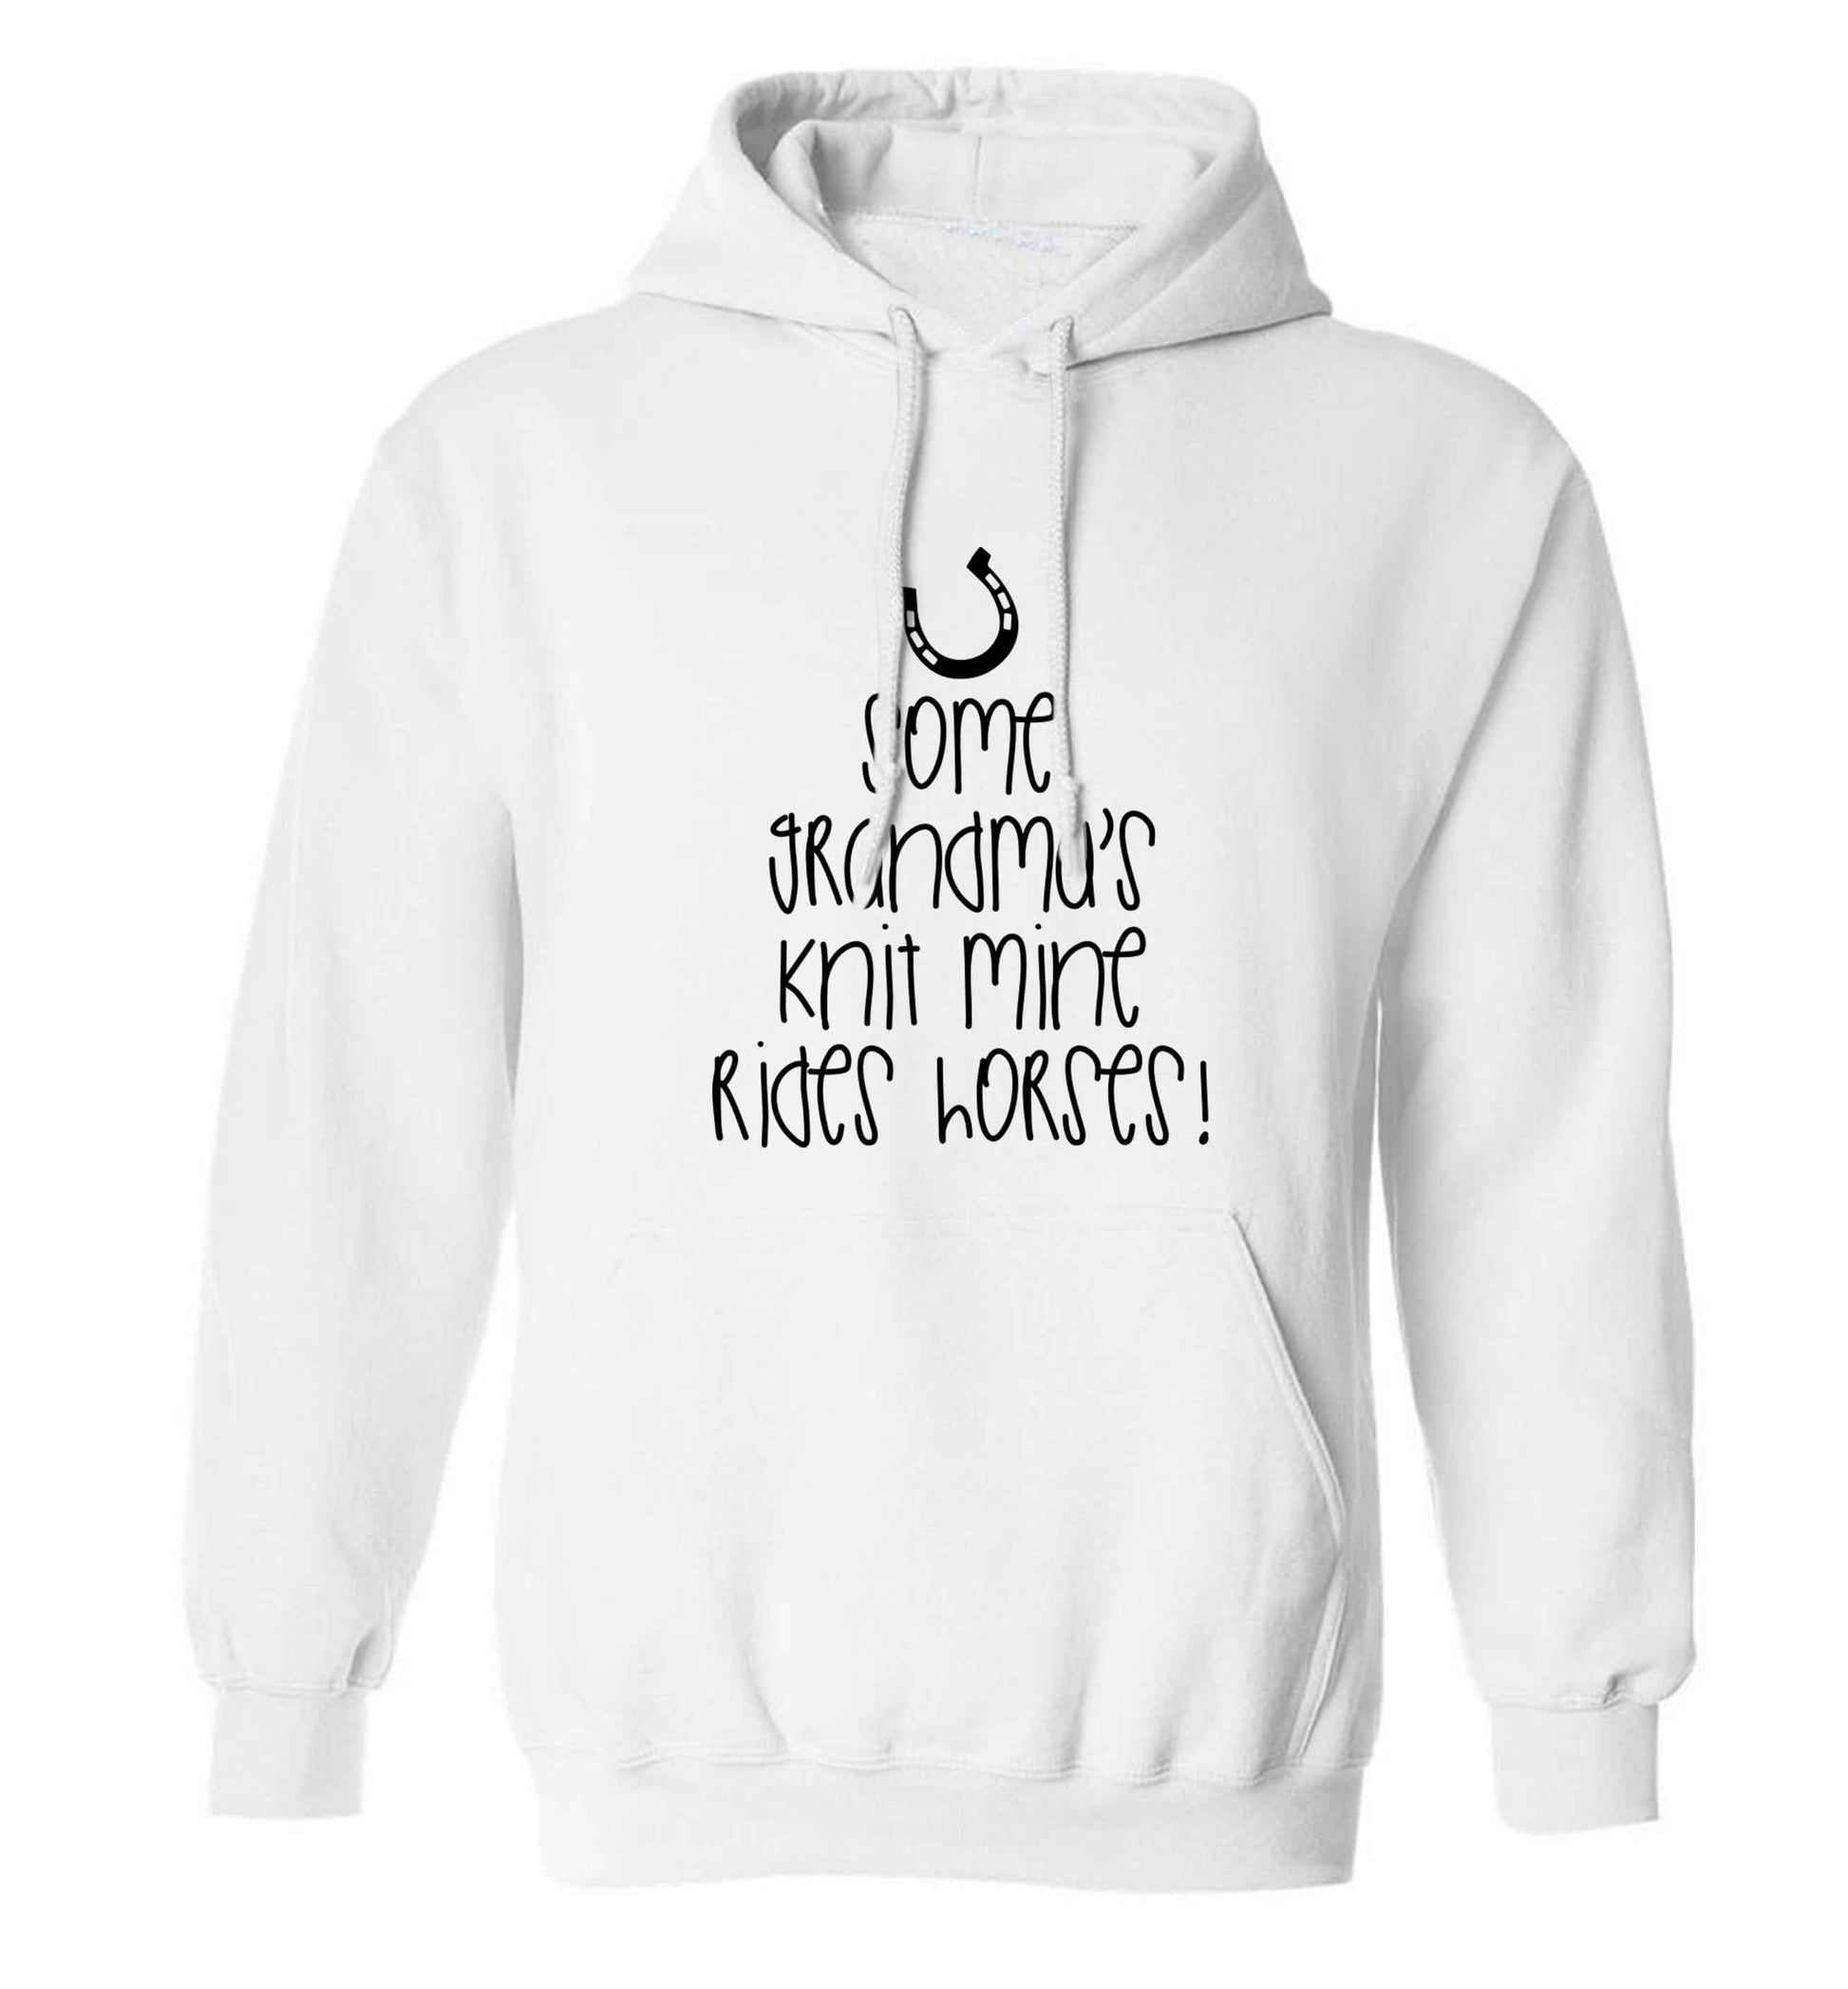 Some grandma's knit mine rides horses adults unisex white hoodie 2XL